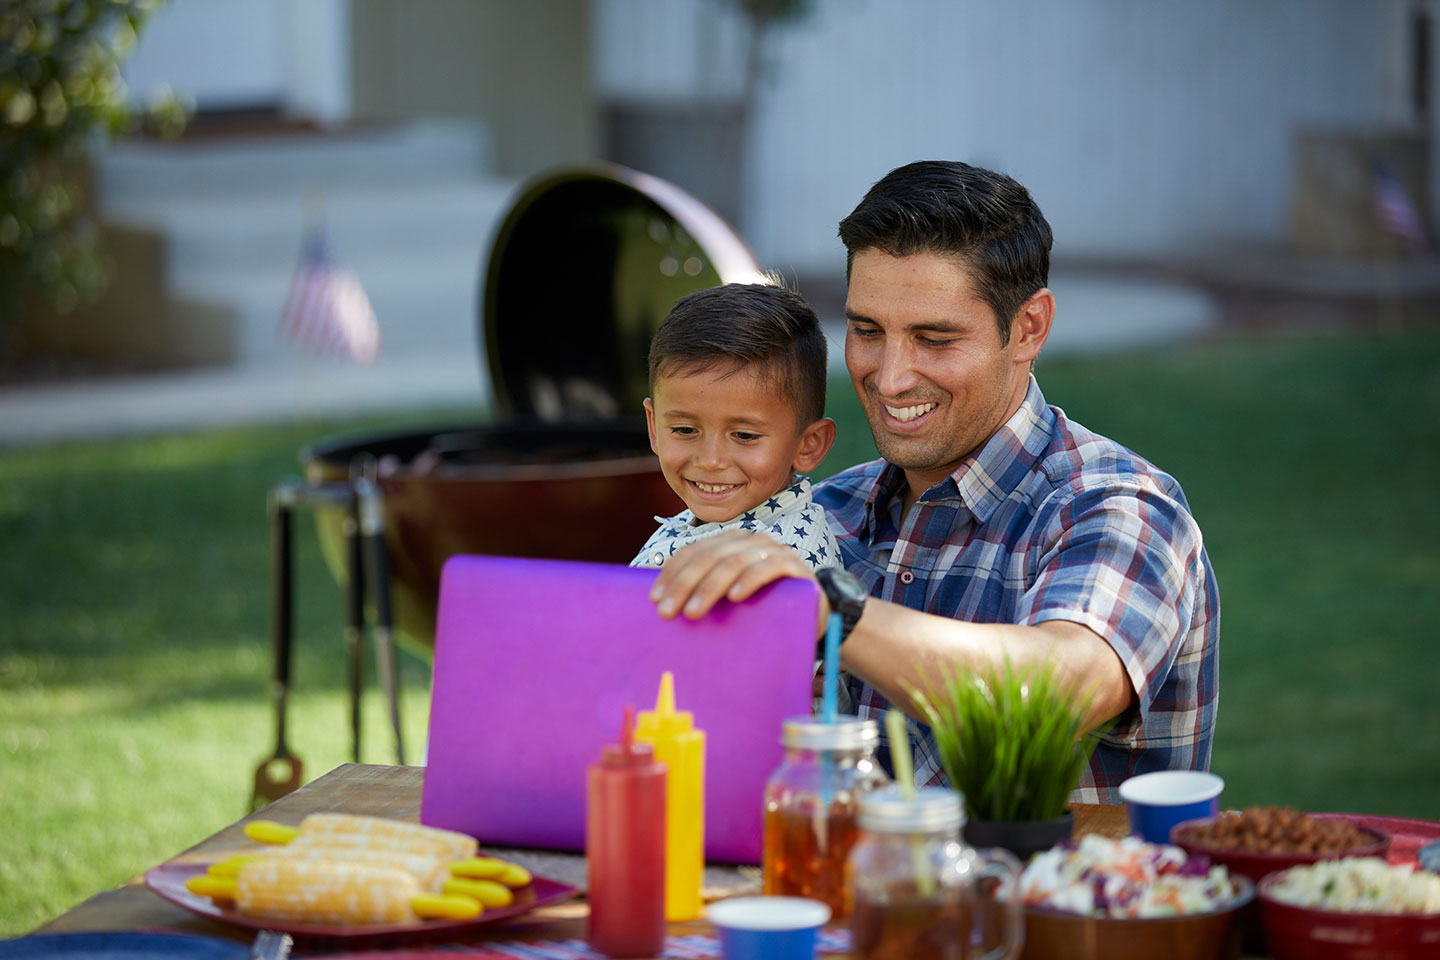 Father and son smiling while working on laptop outside.